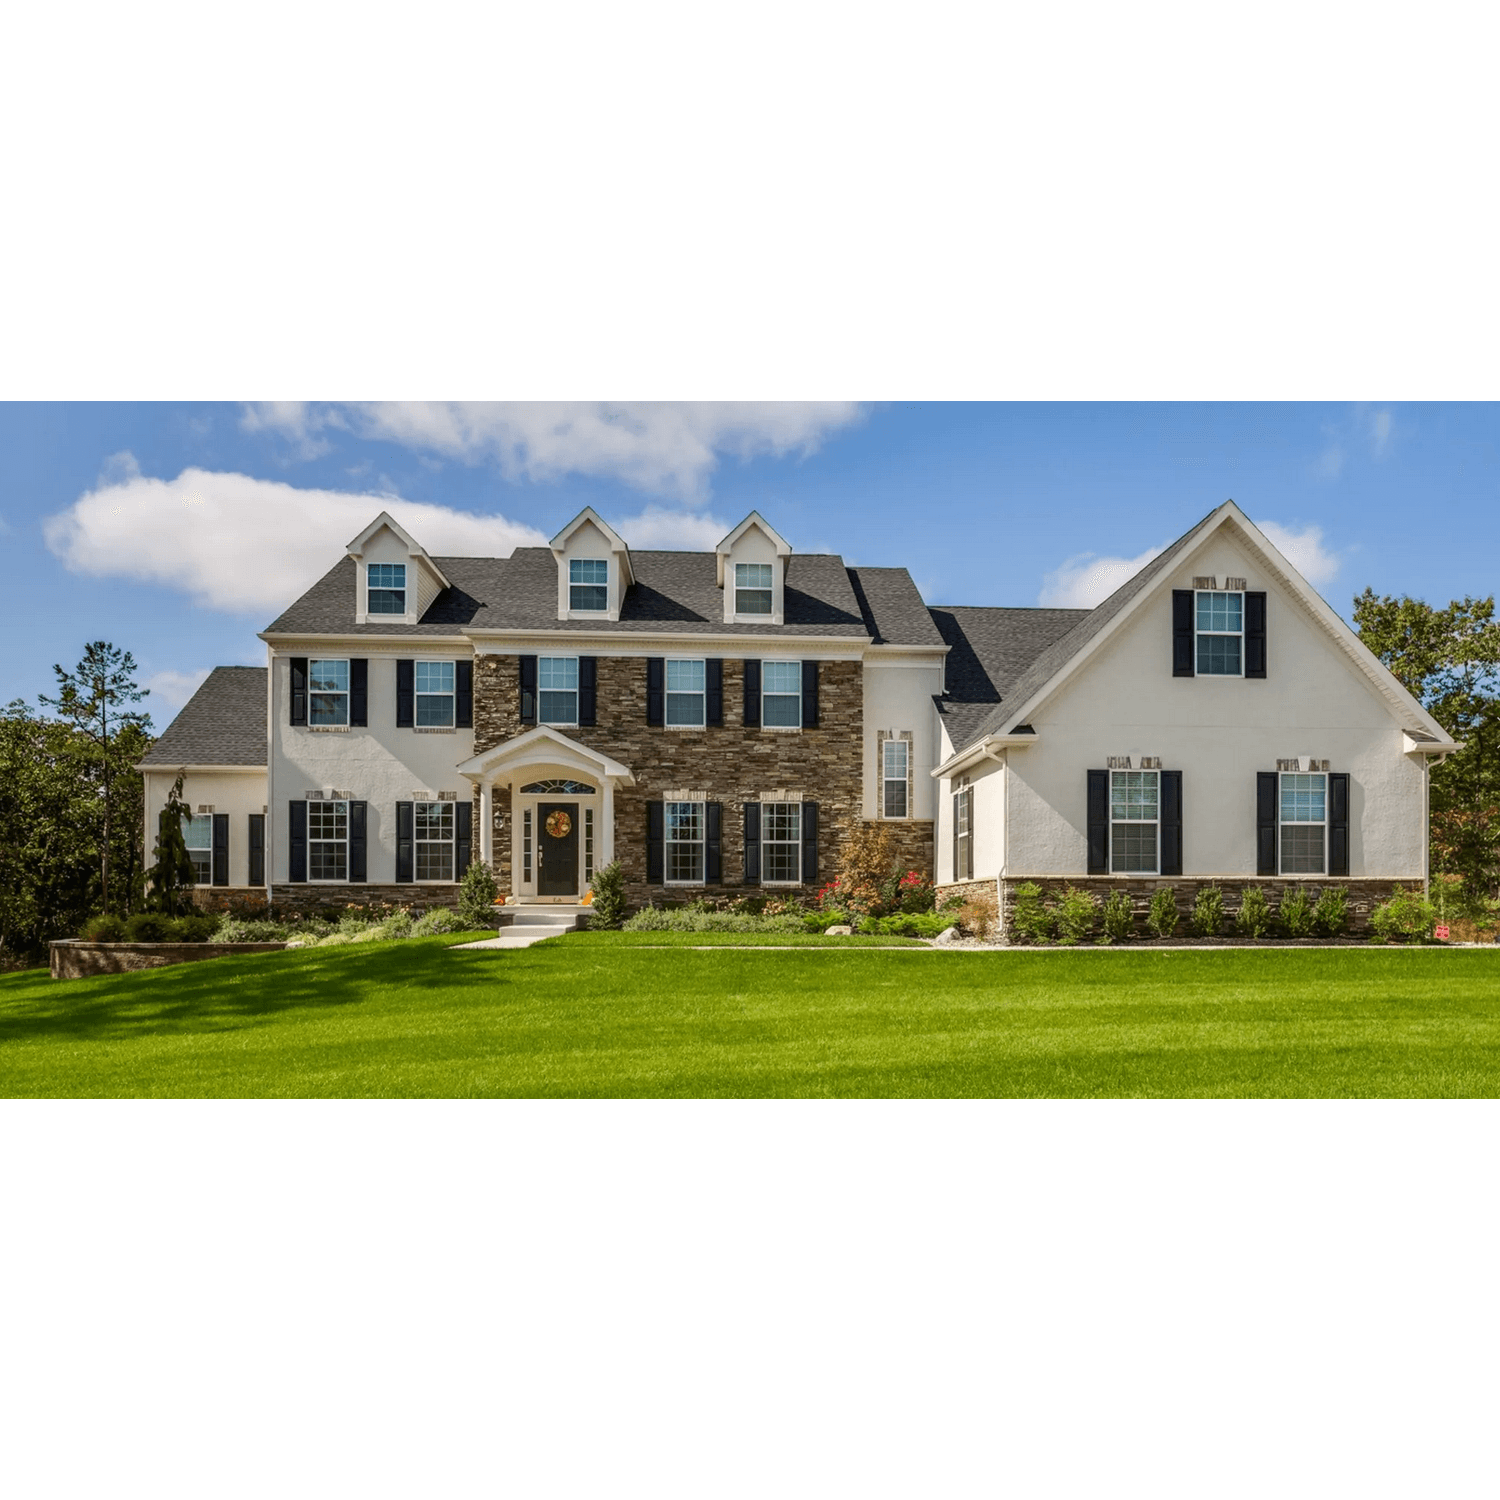 The Reserve at Brookside Farms建於 Balis Drive, Mullica Hill, NJ 08062